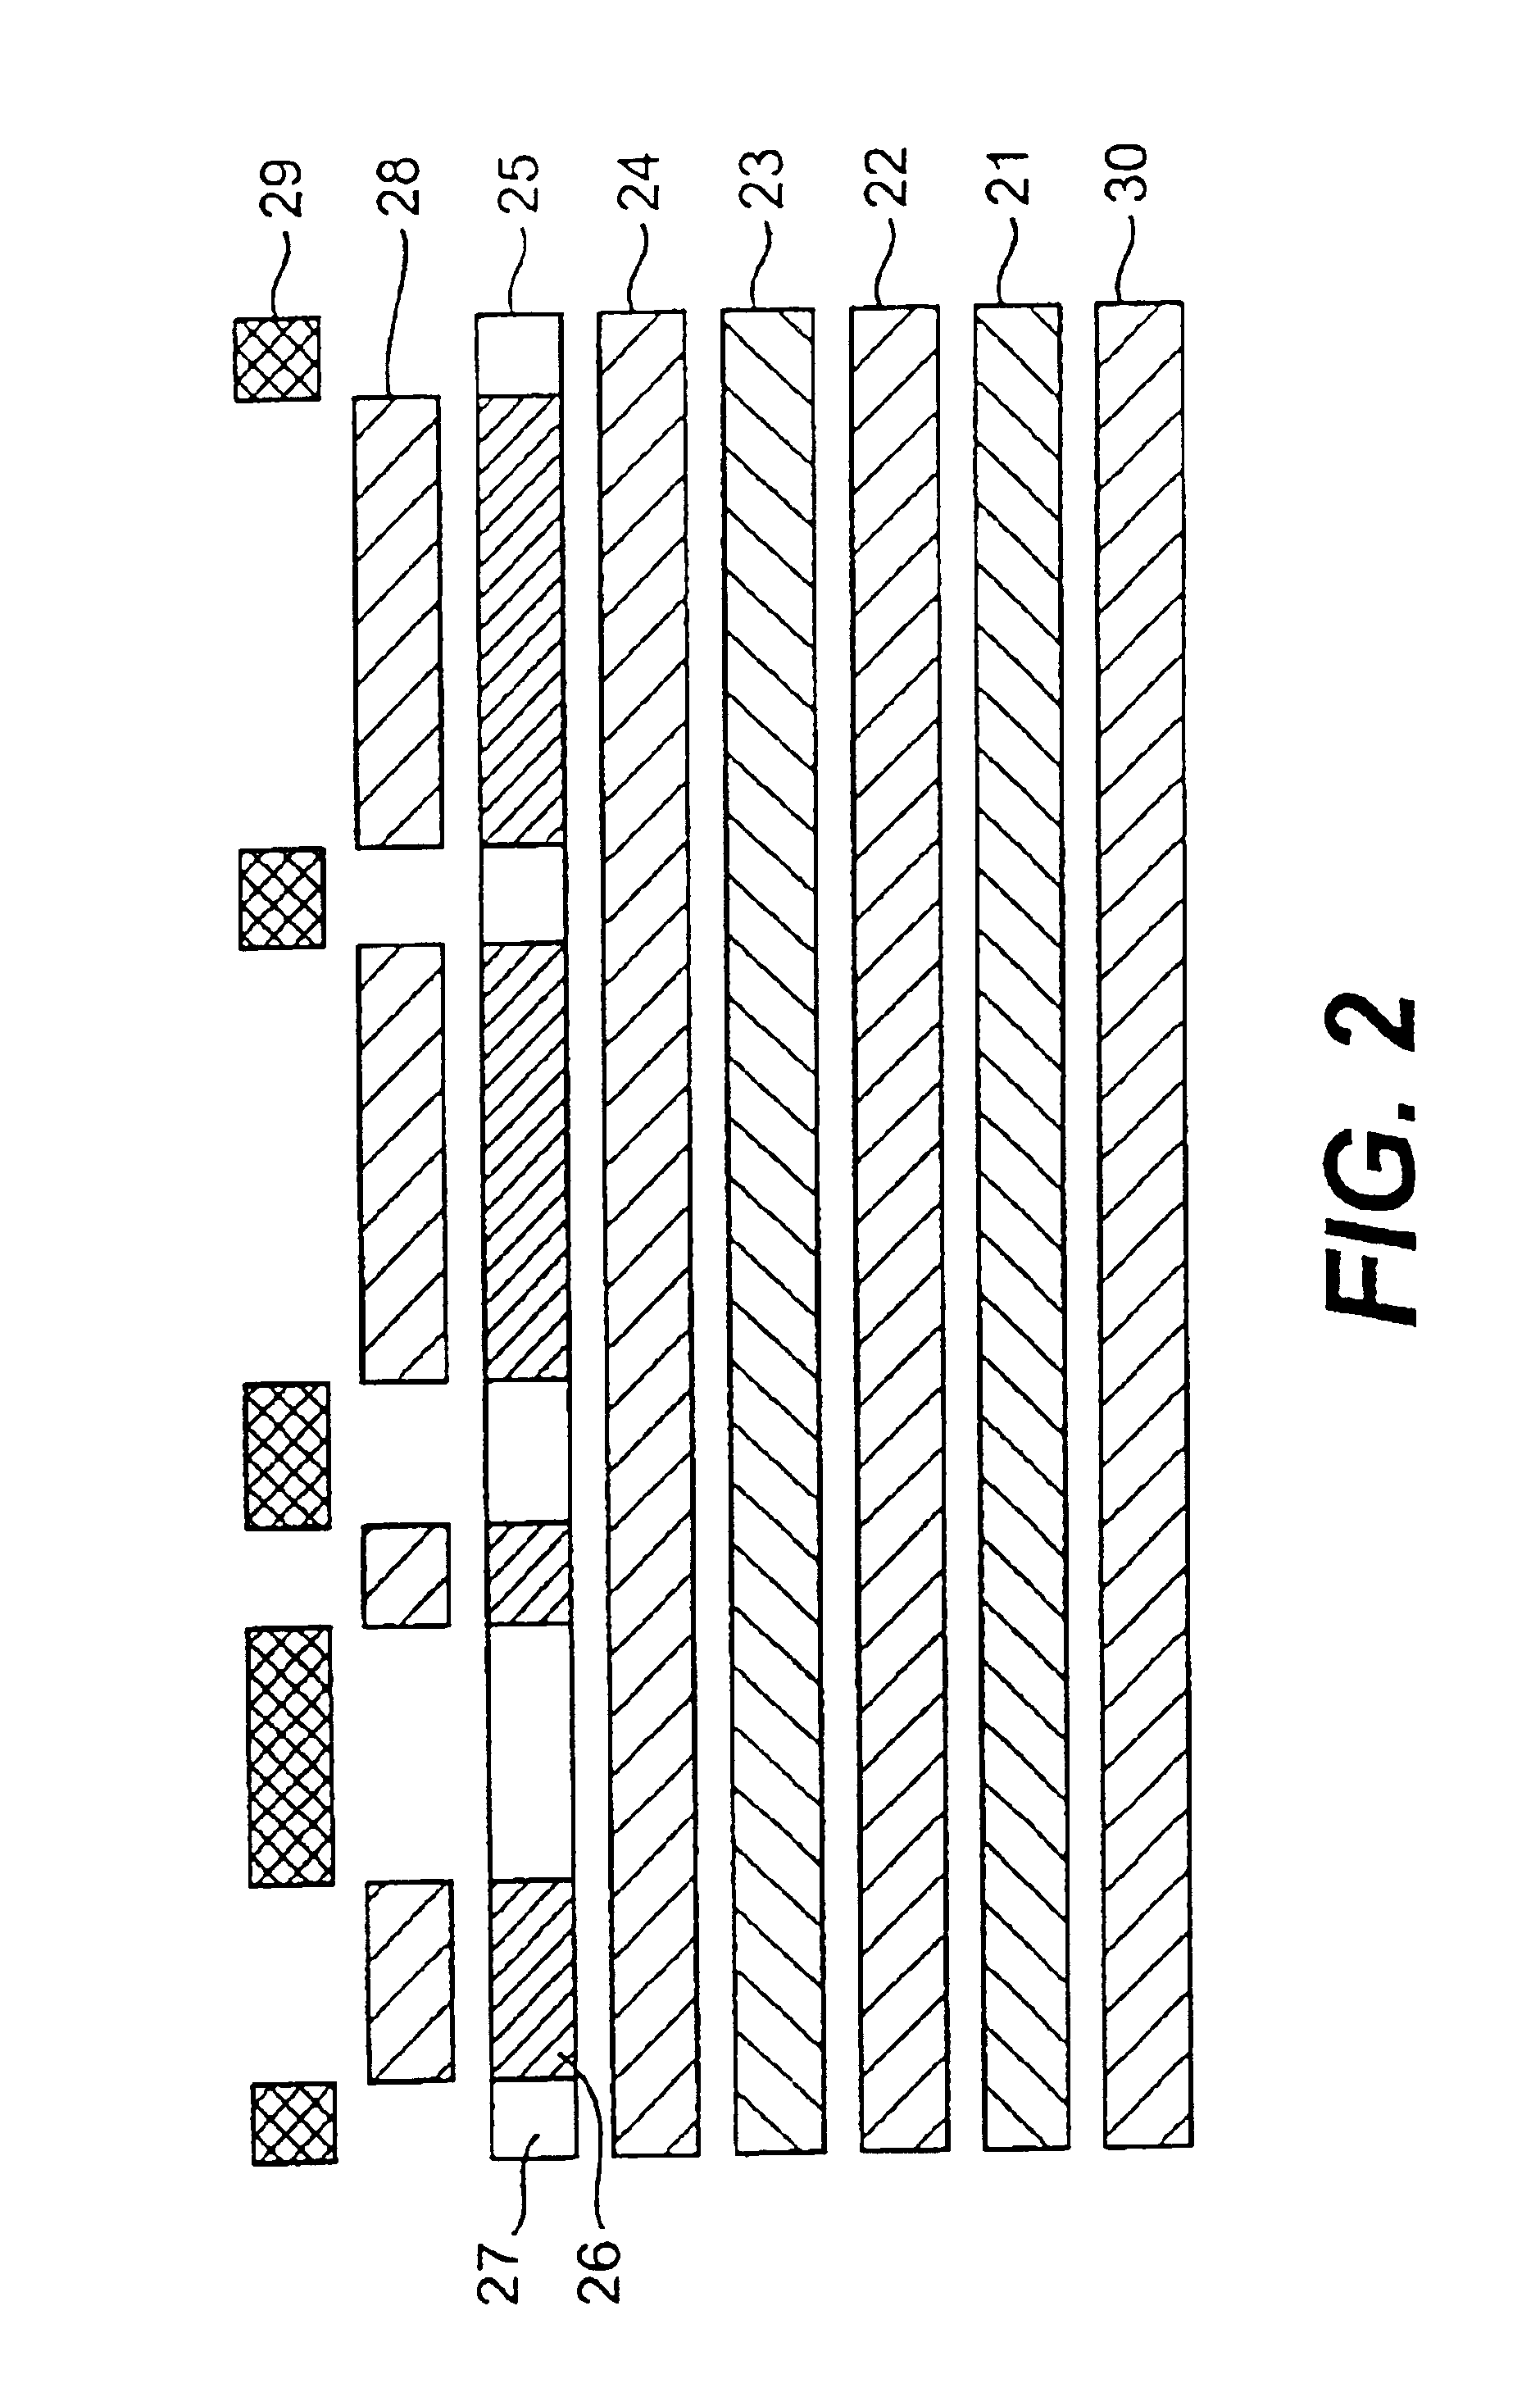 Image transfer sheet with transfer blocking overcoat and heat transfer process using the same